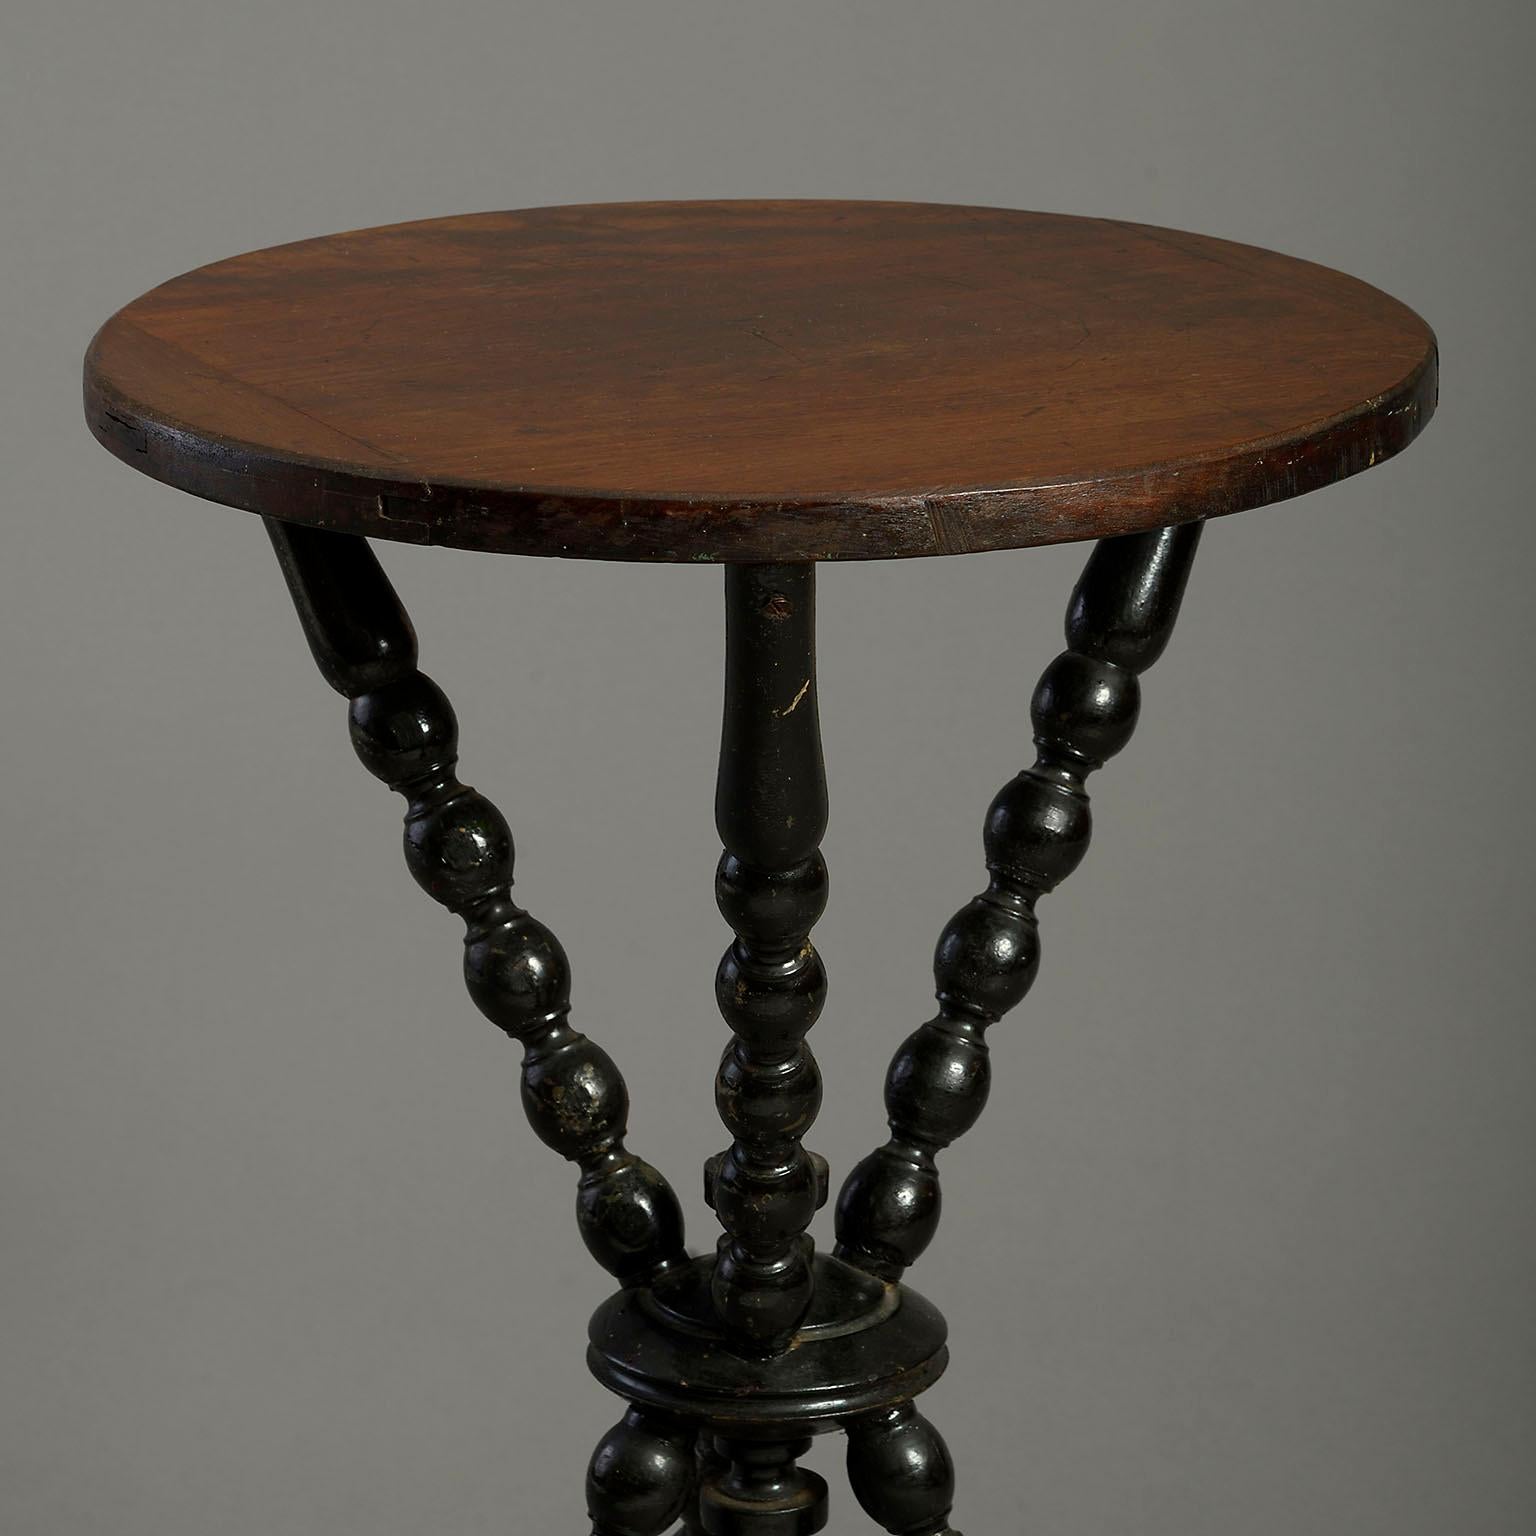 A late 19th century gipsy table, the circular ebonised top set upon three bobbin turned legs with central finials.

